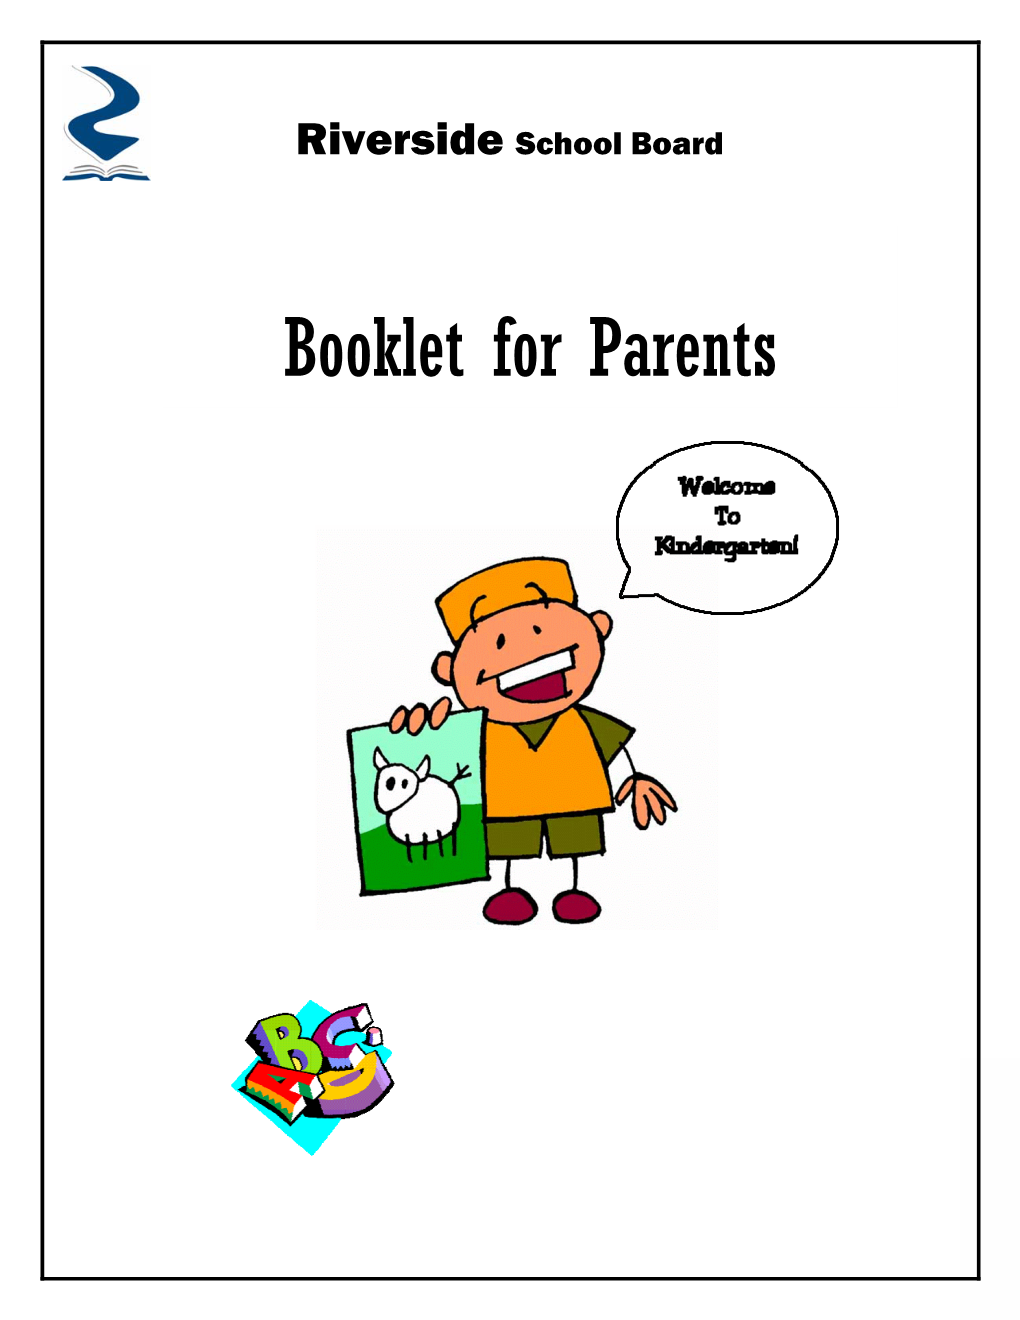 Booklet for Parents